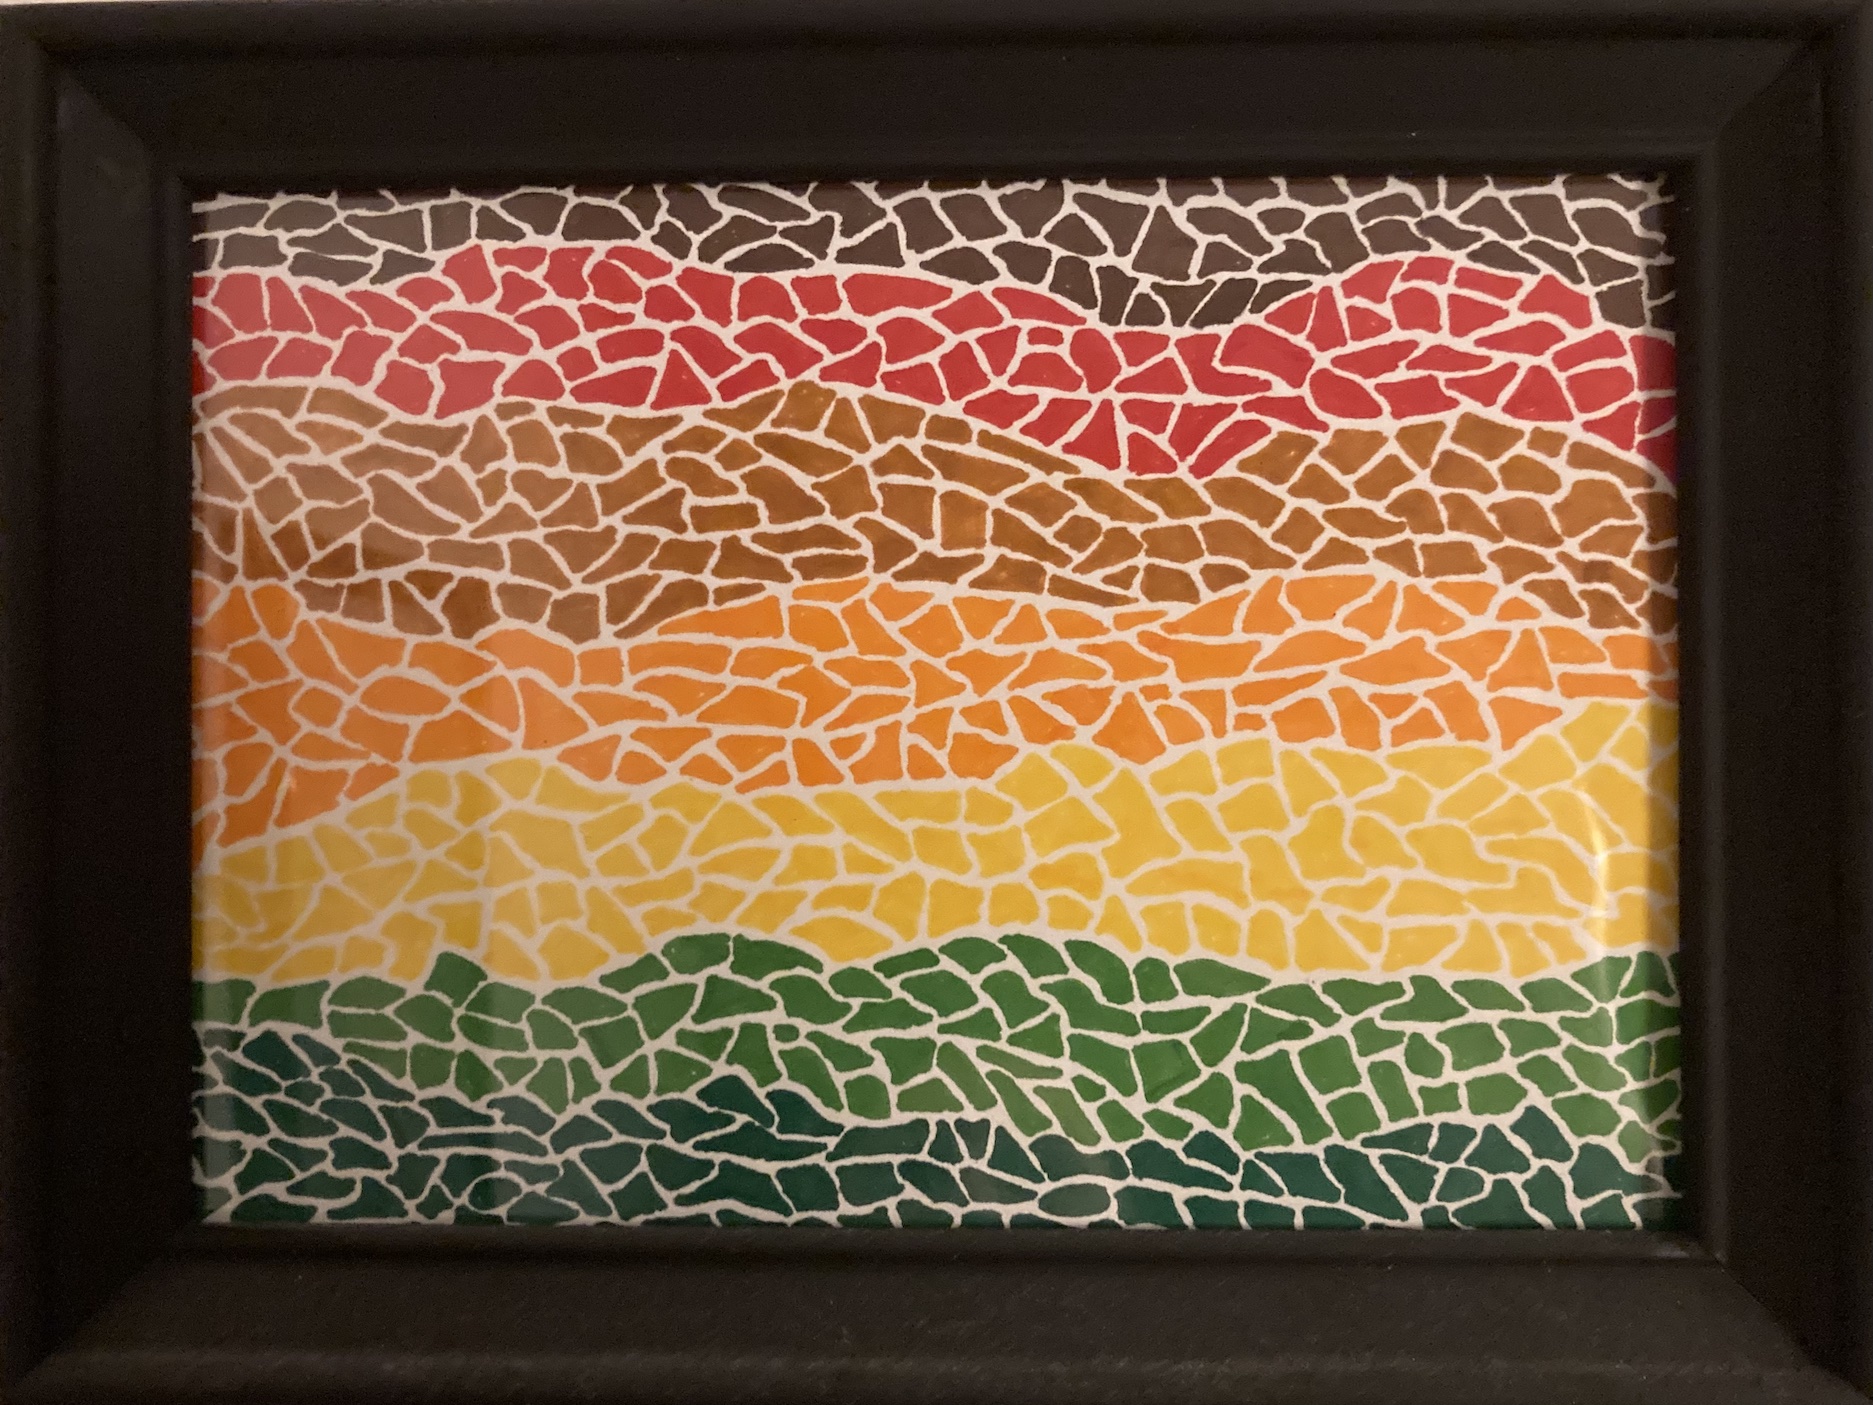 a picture of a framed marker on paper drawing consisting of small abstract shapes in bands of seven colors evocative of a moasaic